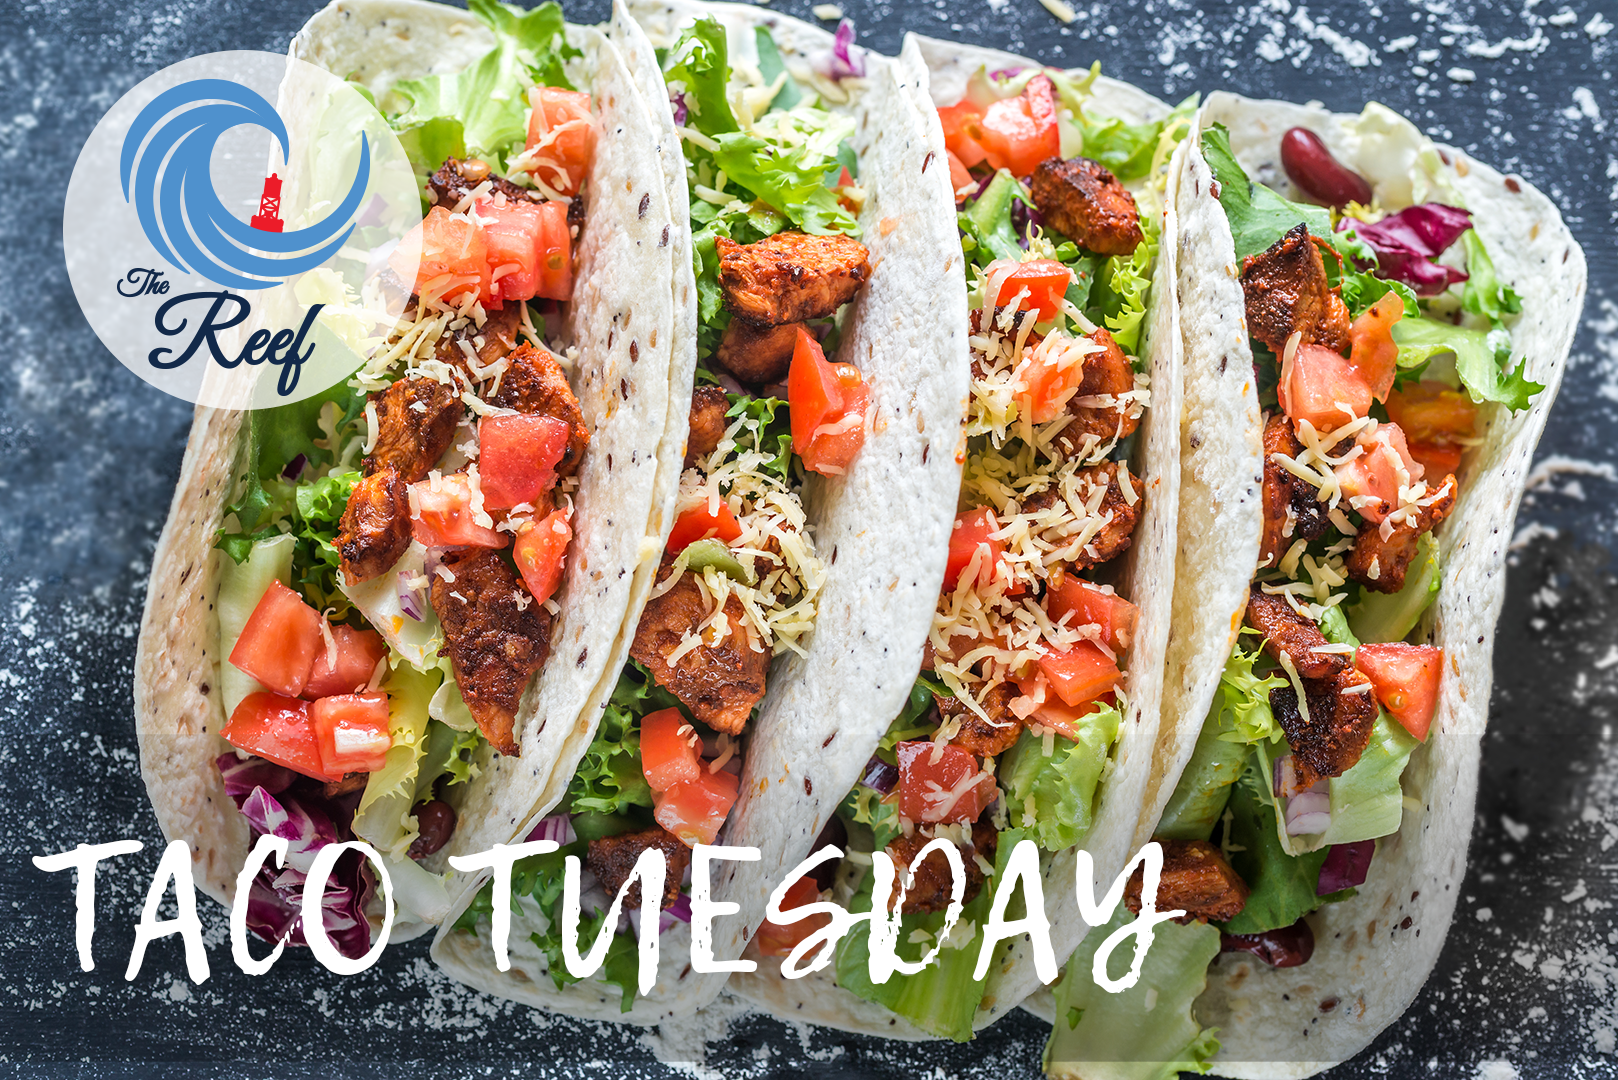 taco tuesday at the reef